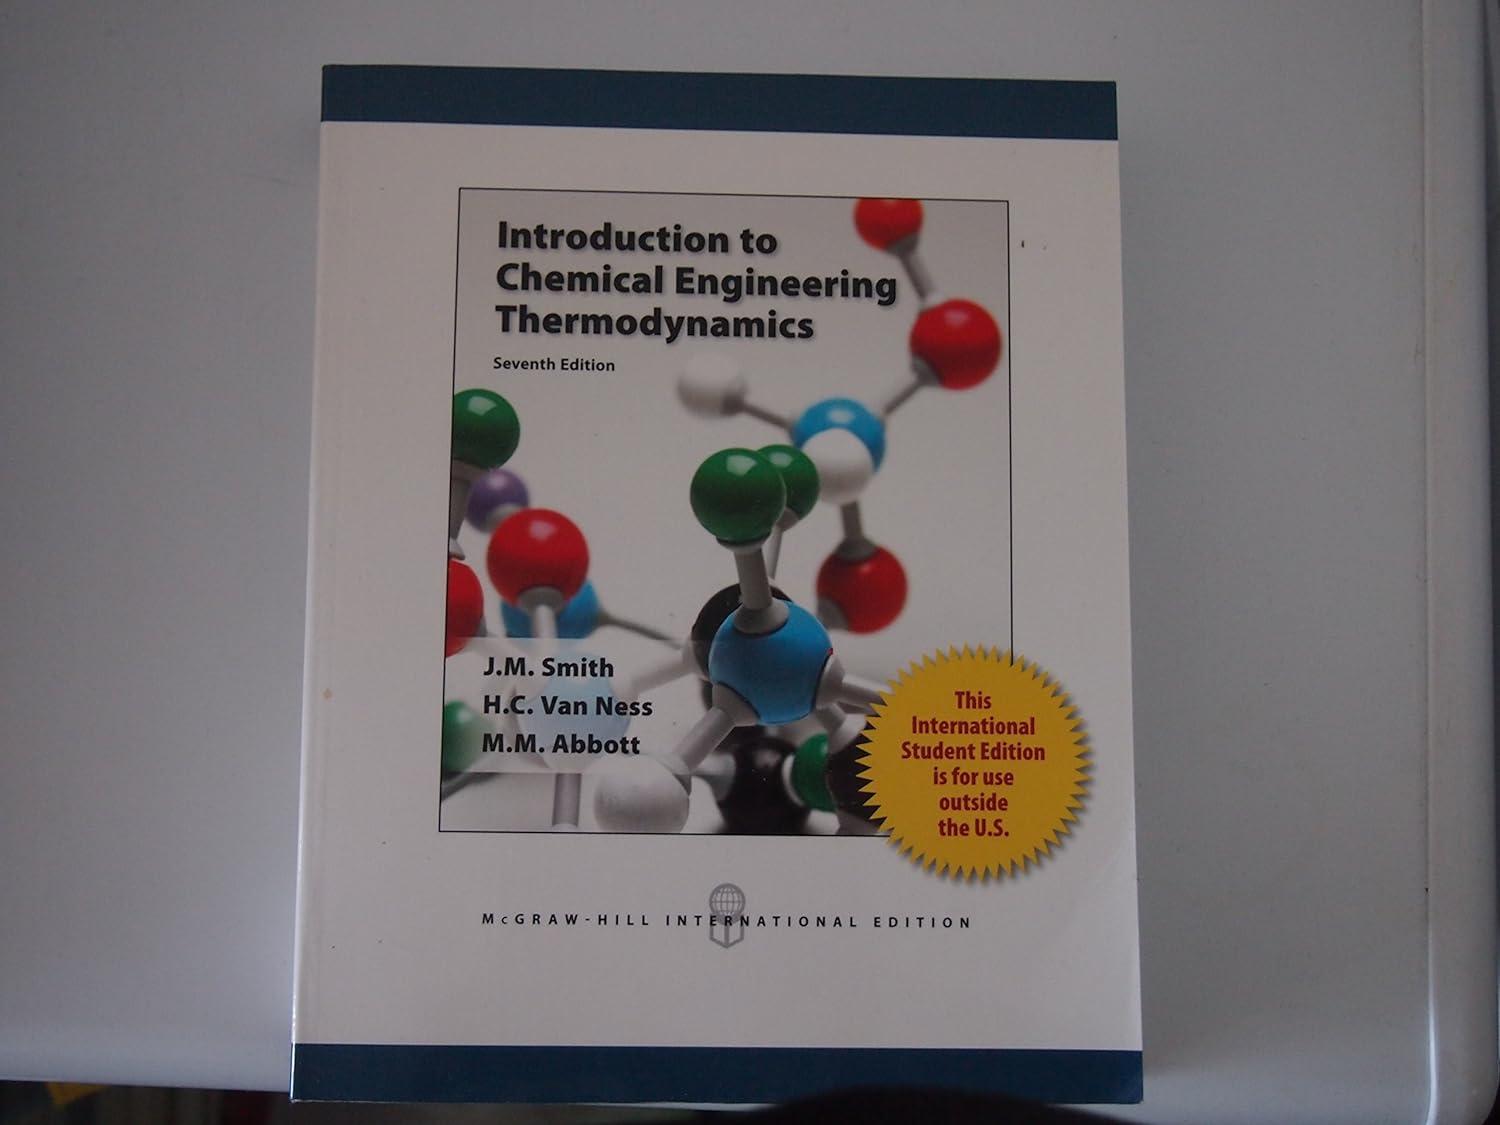 introduction to chemical engineering thermodynamics 7th edition m.m. abbott j. m. smith, h.c. van ness